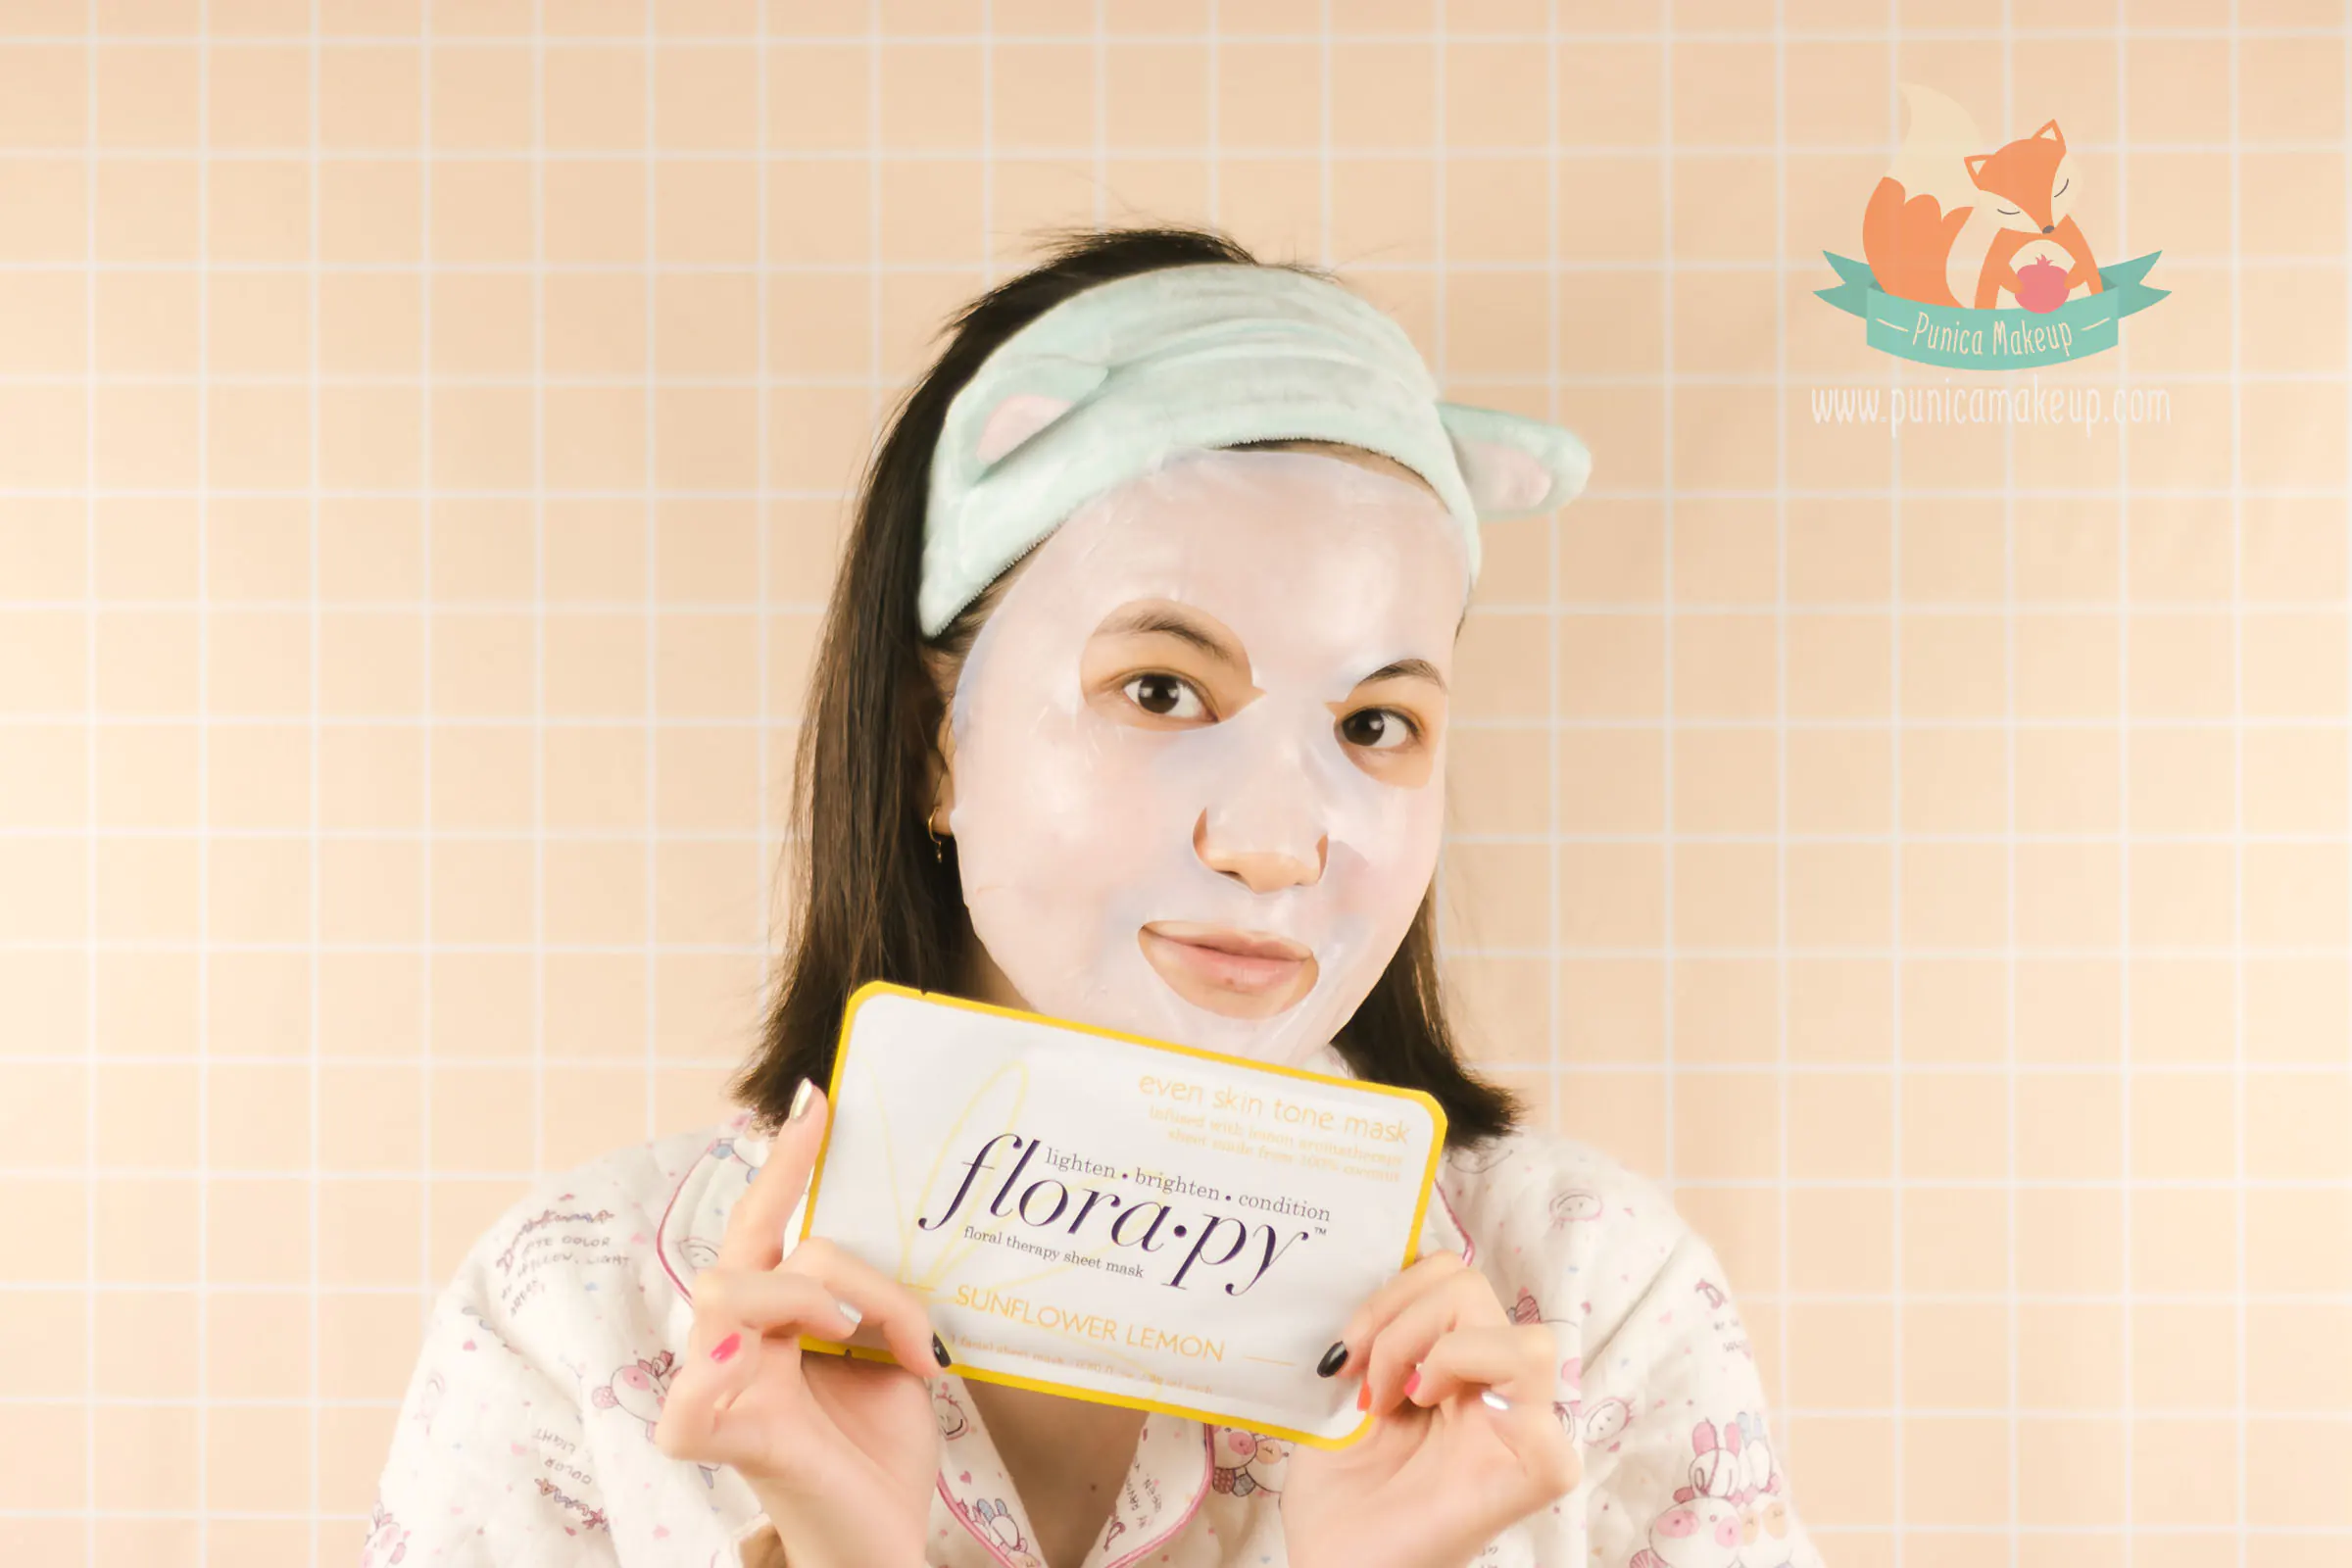 Florapy Beauty Even Skin Tone Sheet Mask on my face